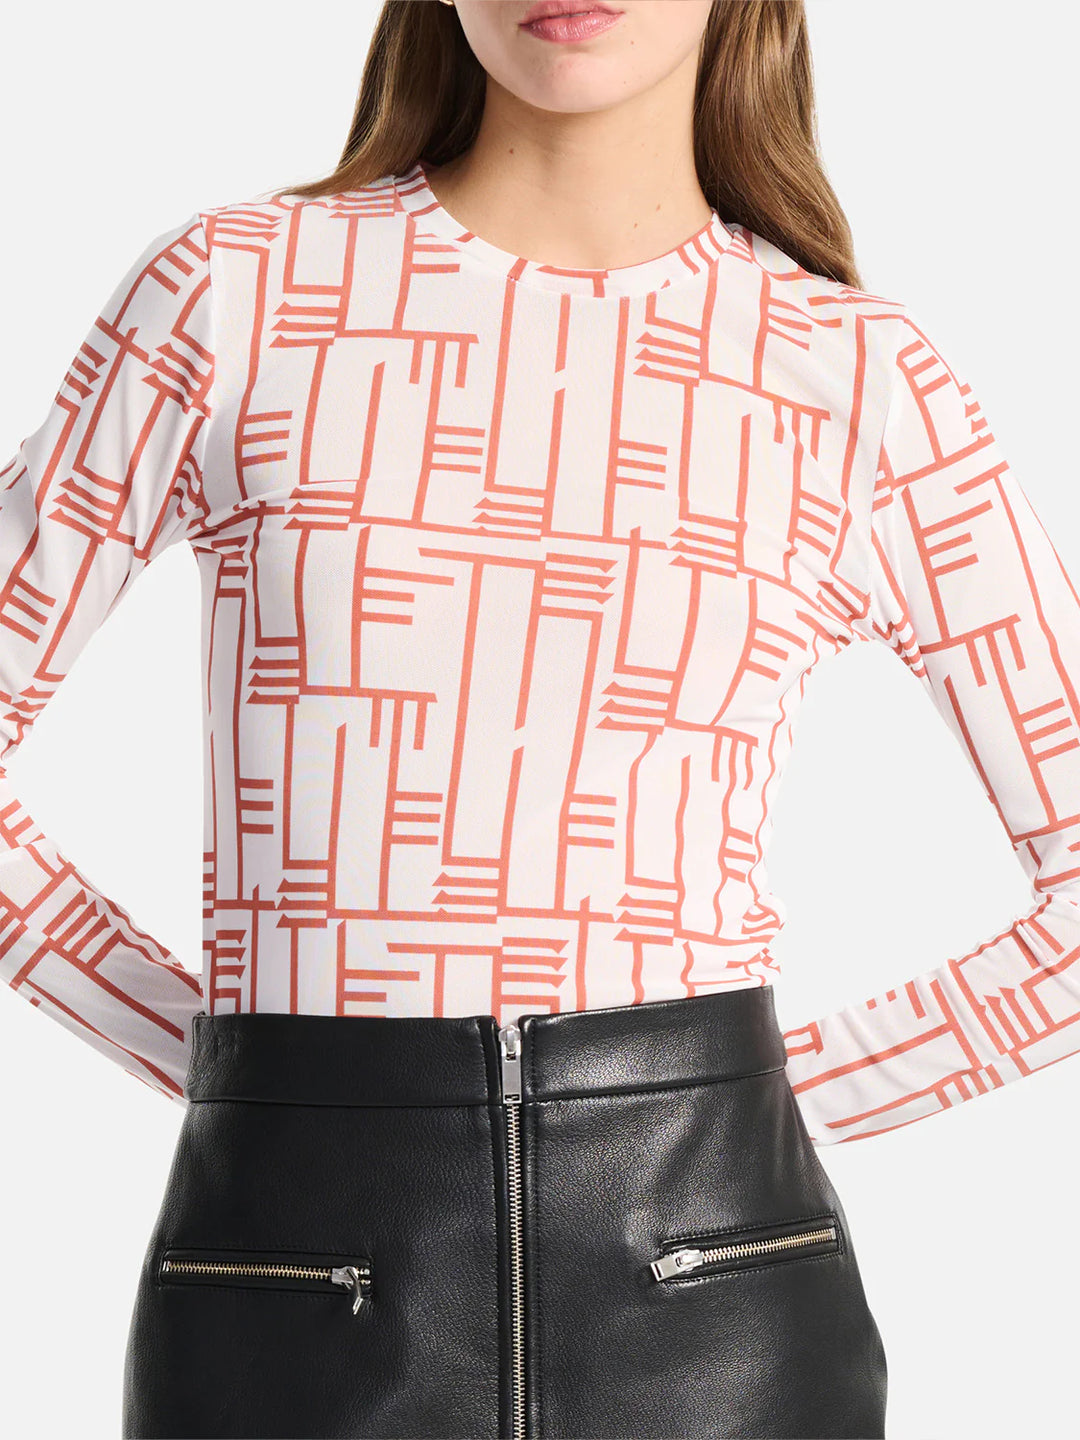 Ena Pelly Willow Mesh Top - Red Brick Print